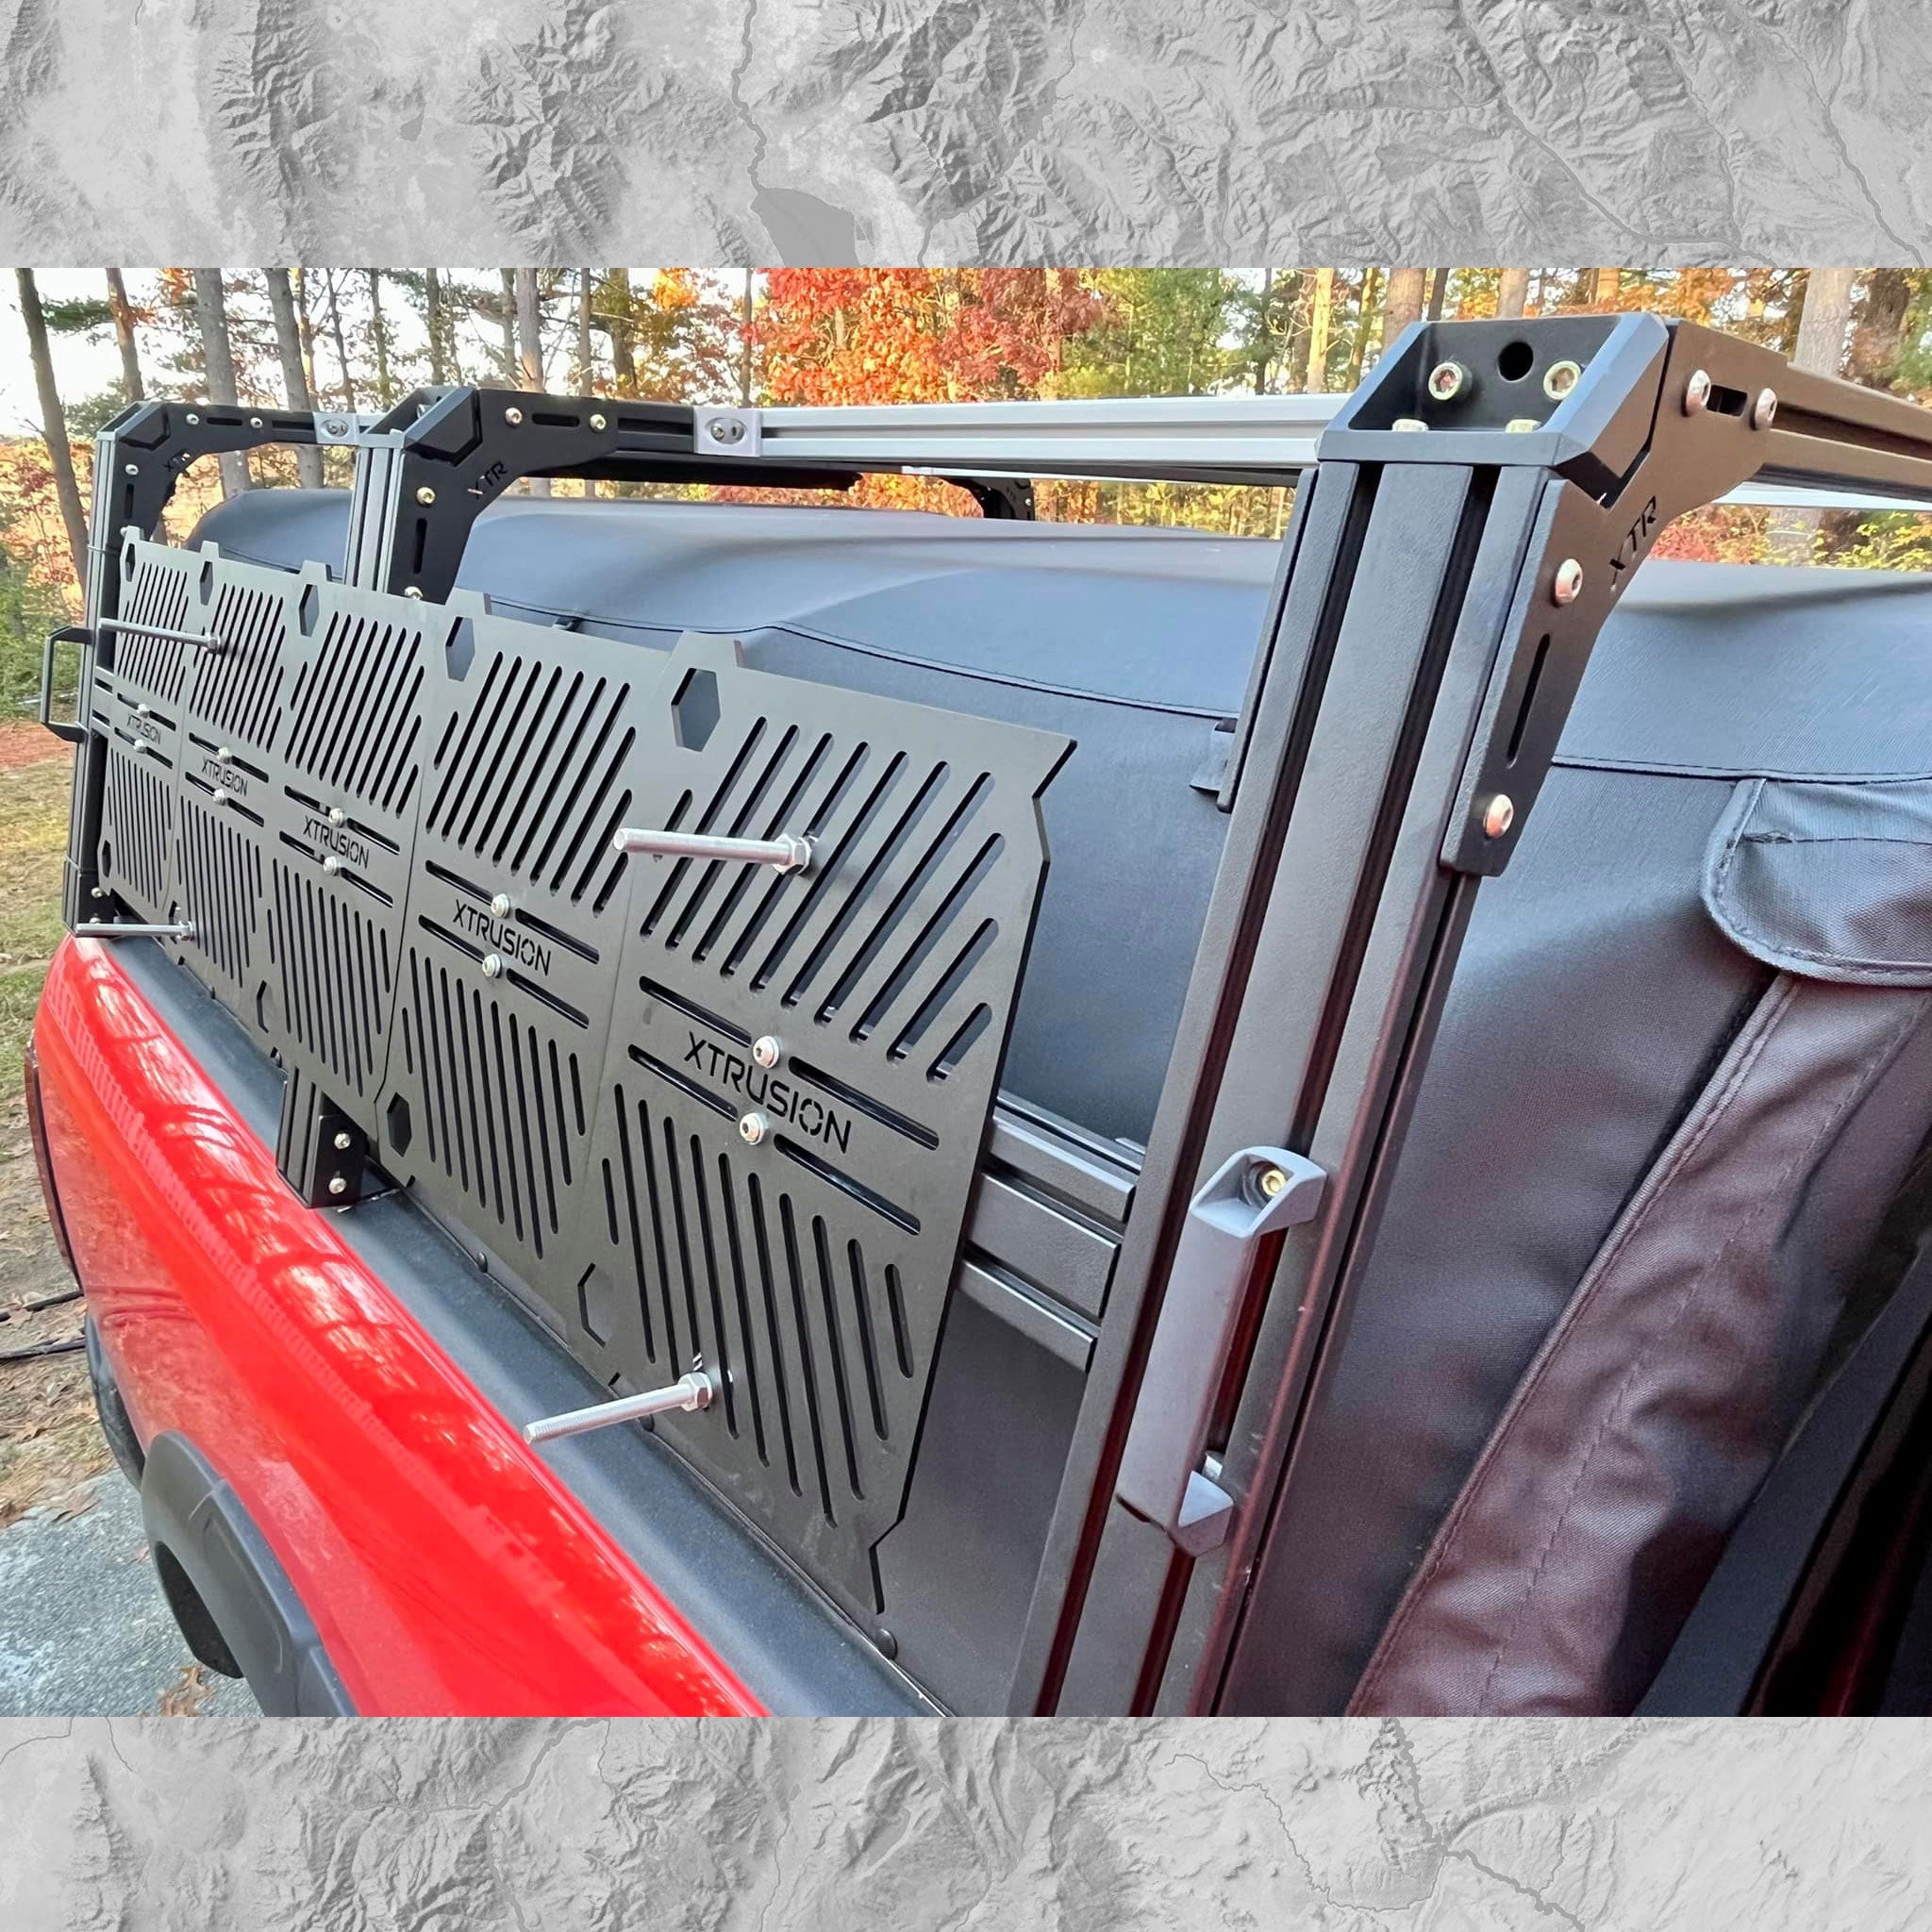 Dodge RAM 2500 XTR1 HD (Heavy Duty) bed rack build with SofTopper, equipped with HD triple column uprights, 15-inch Xtrusion Molle panels, and traction boards mounts.